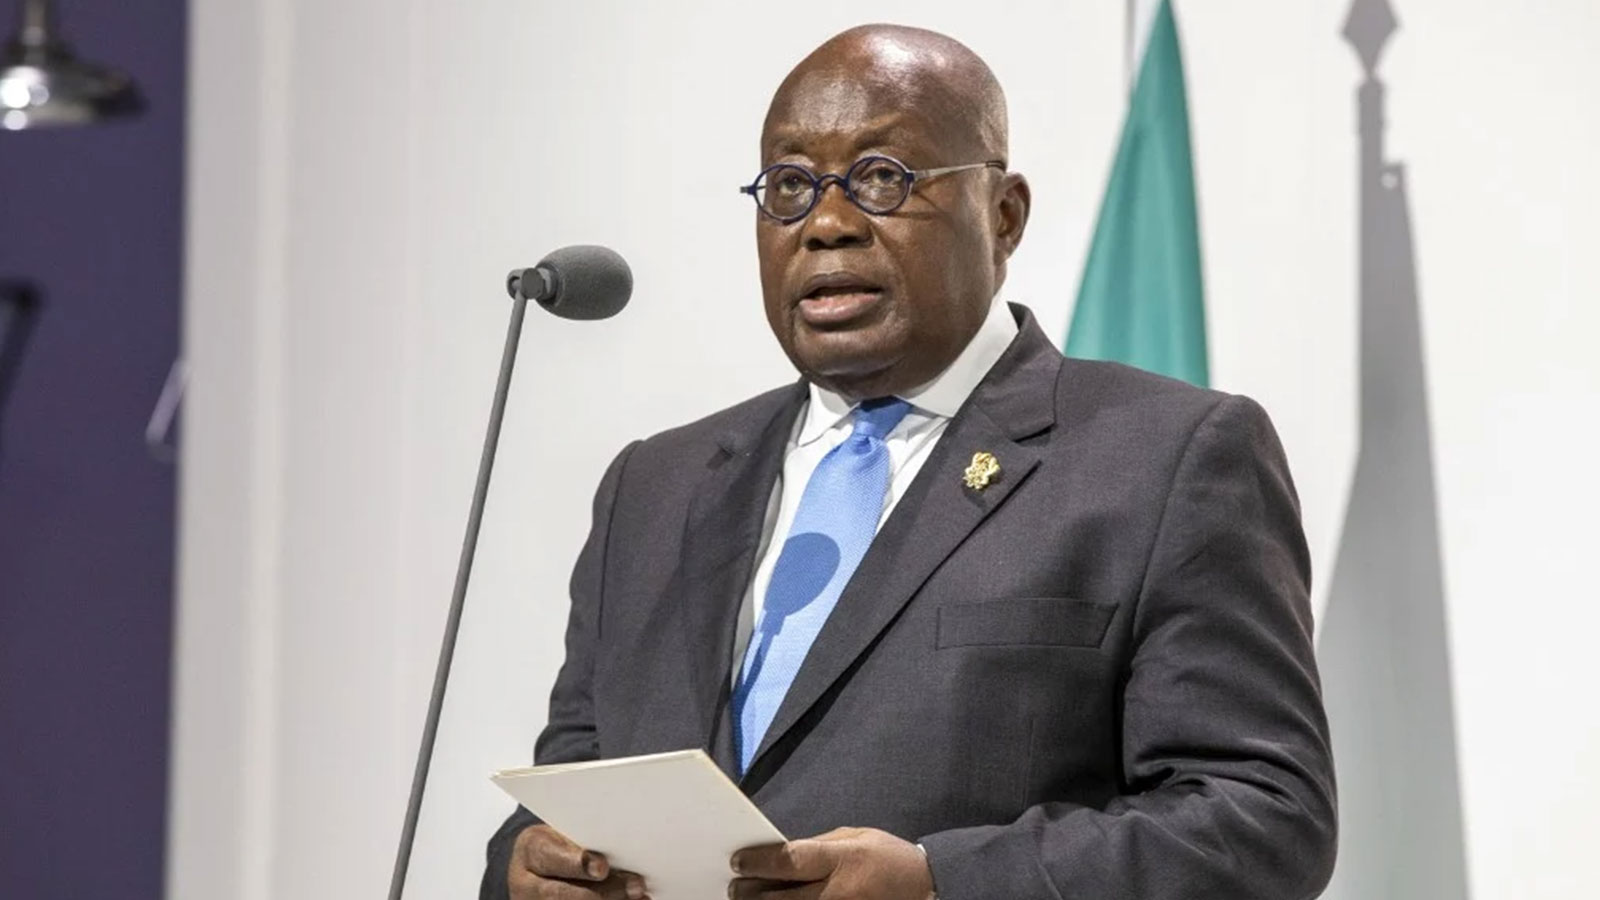 Europe must pay Africa reparations for slave trade, says Akufo-Addo